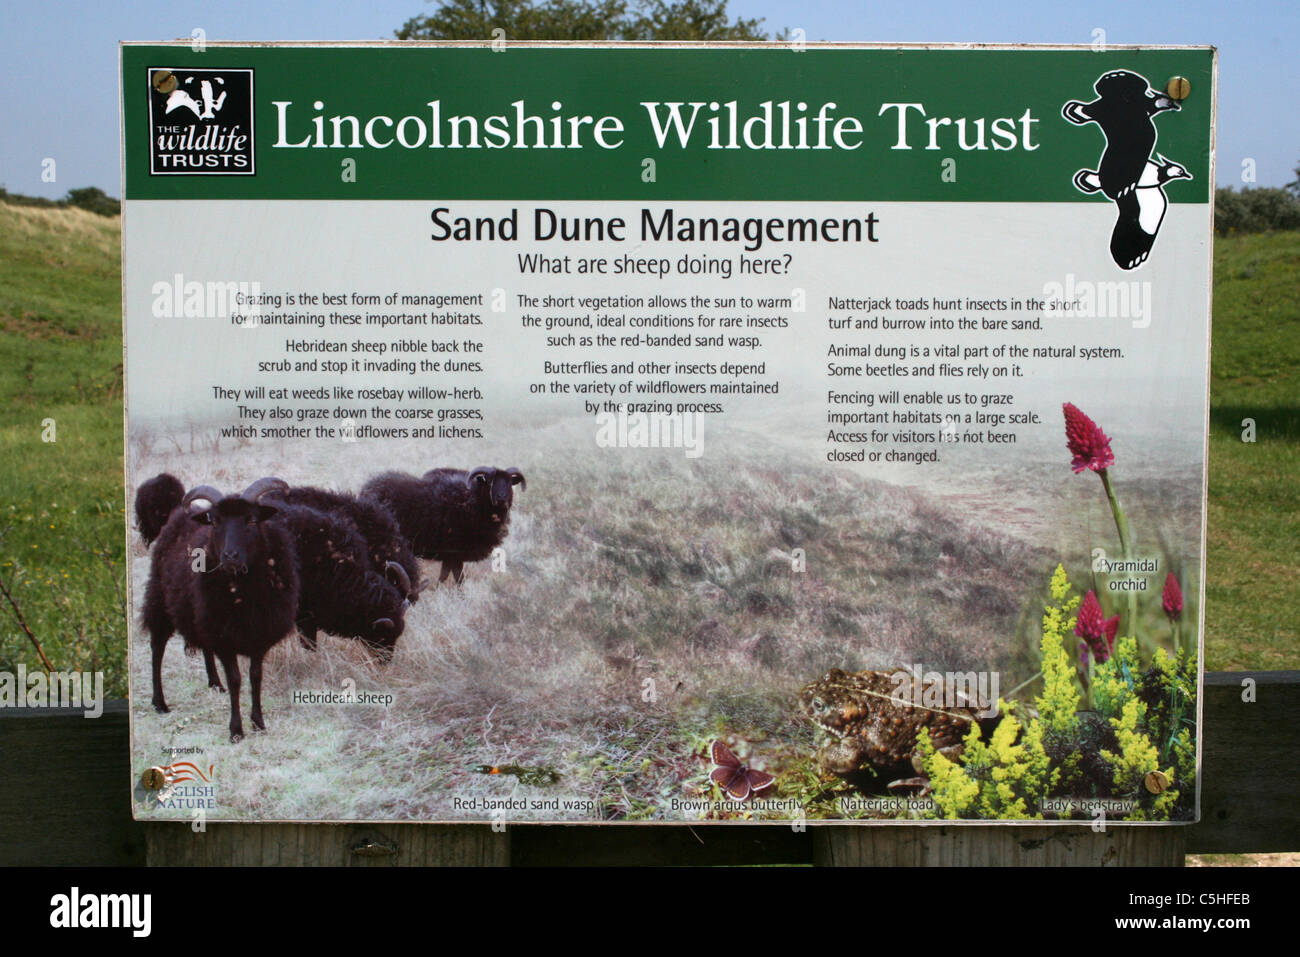 Lincolnshire Wildlife Trust Information Board On Sand Dune Management Stock Photo